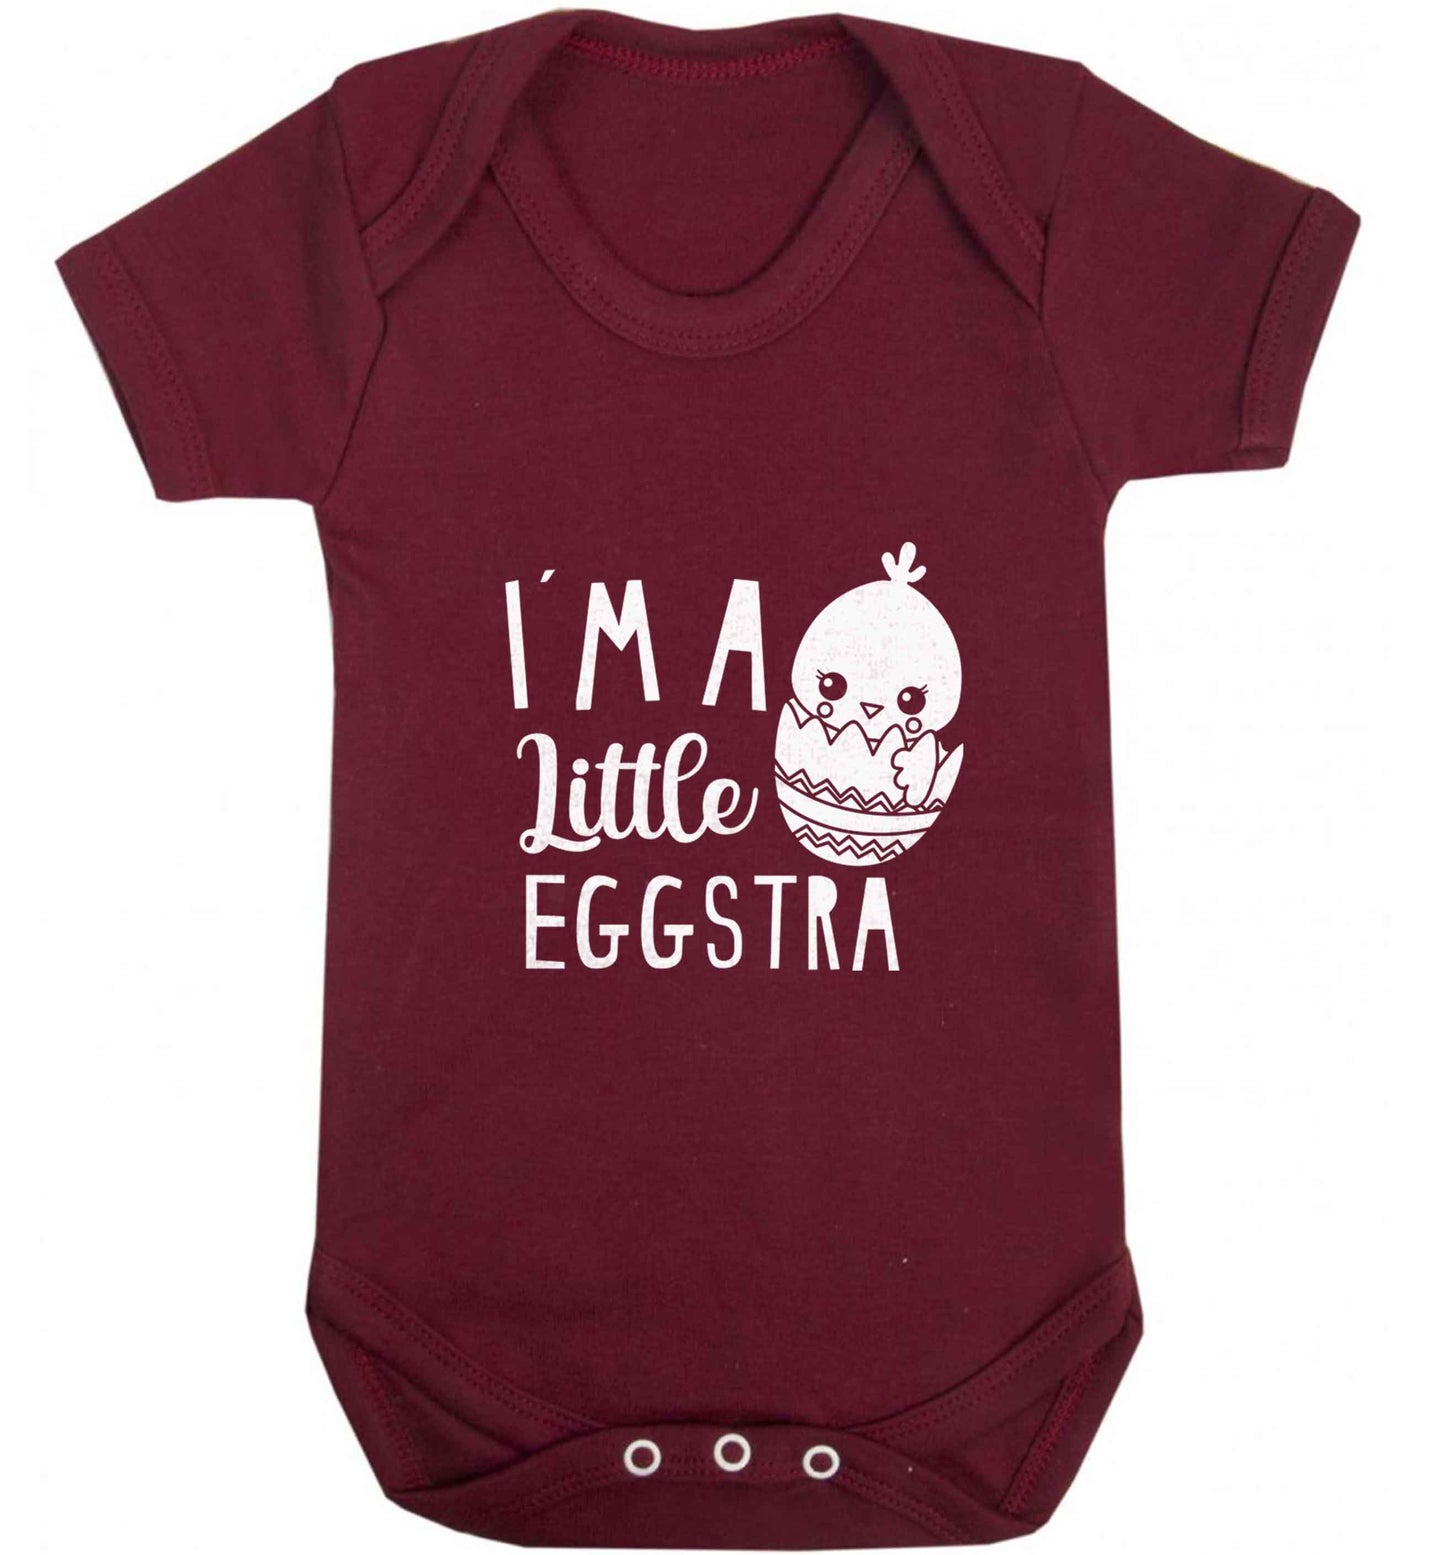 I'm a little eggstra baby vest maroon 18-24 months